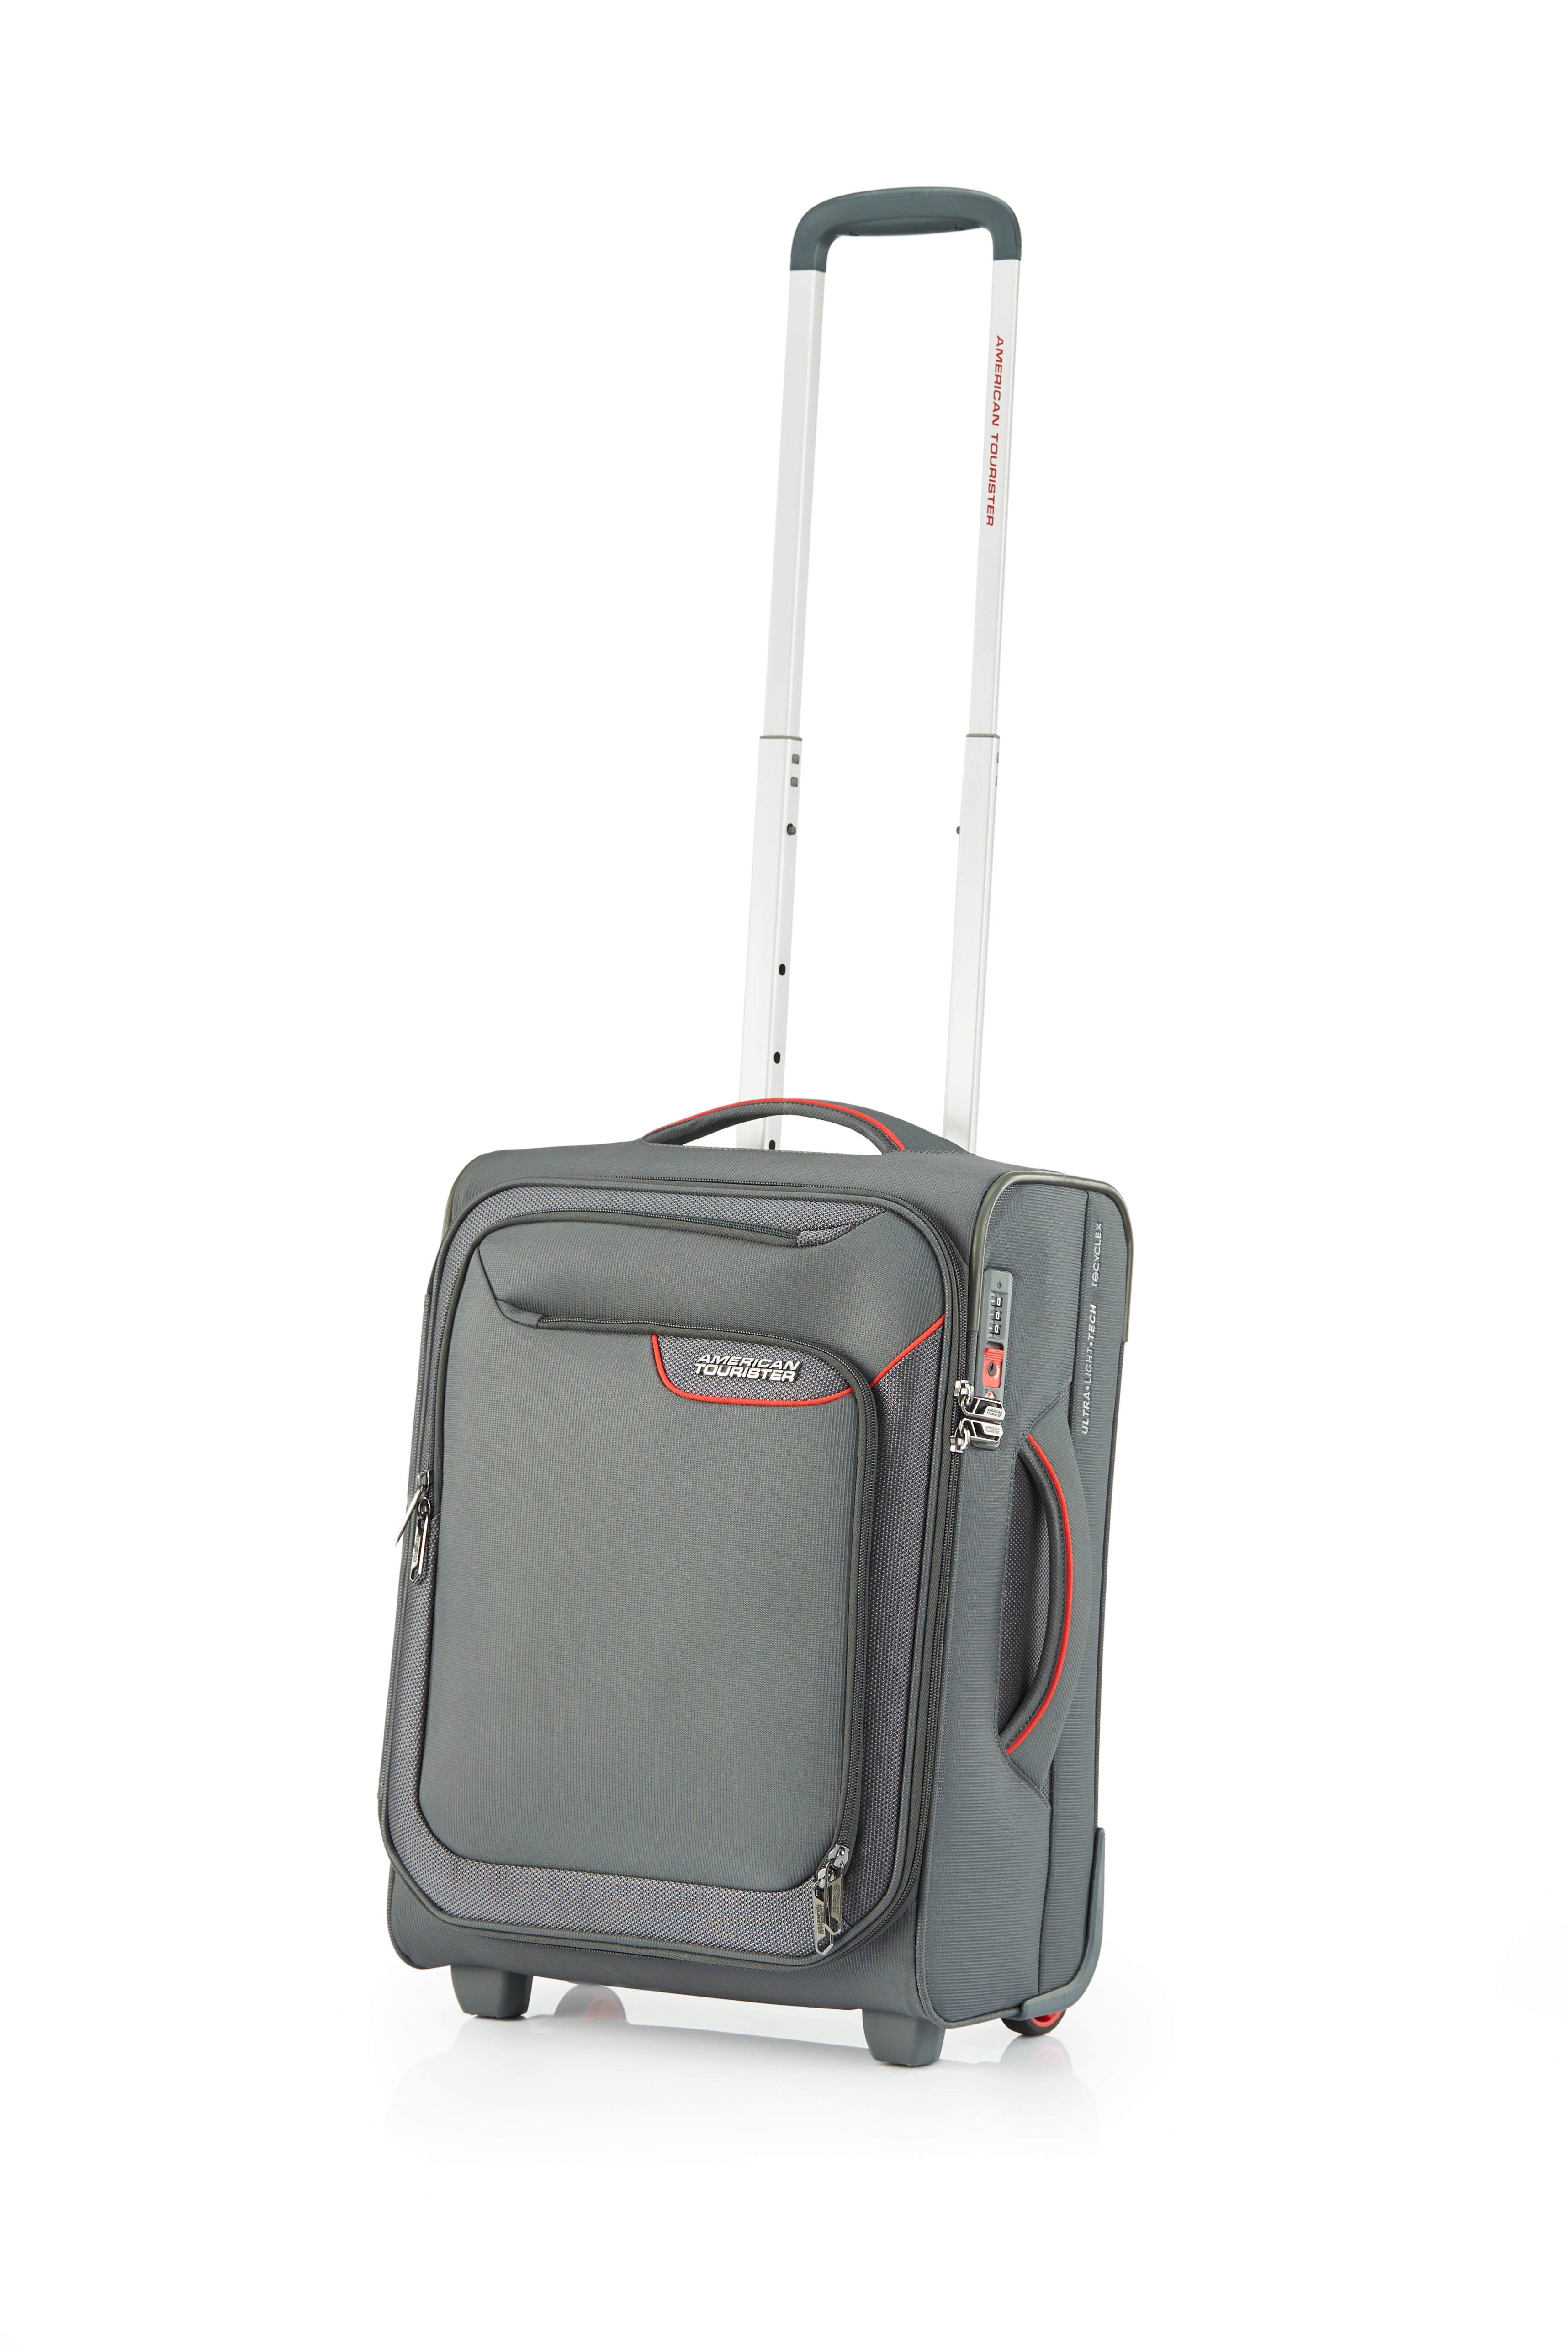 American Tourister - Applite ECO 50cm Small Suitcase - Grey/Red-1